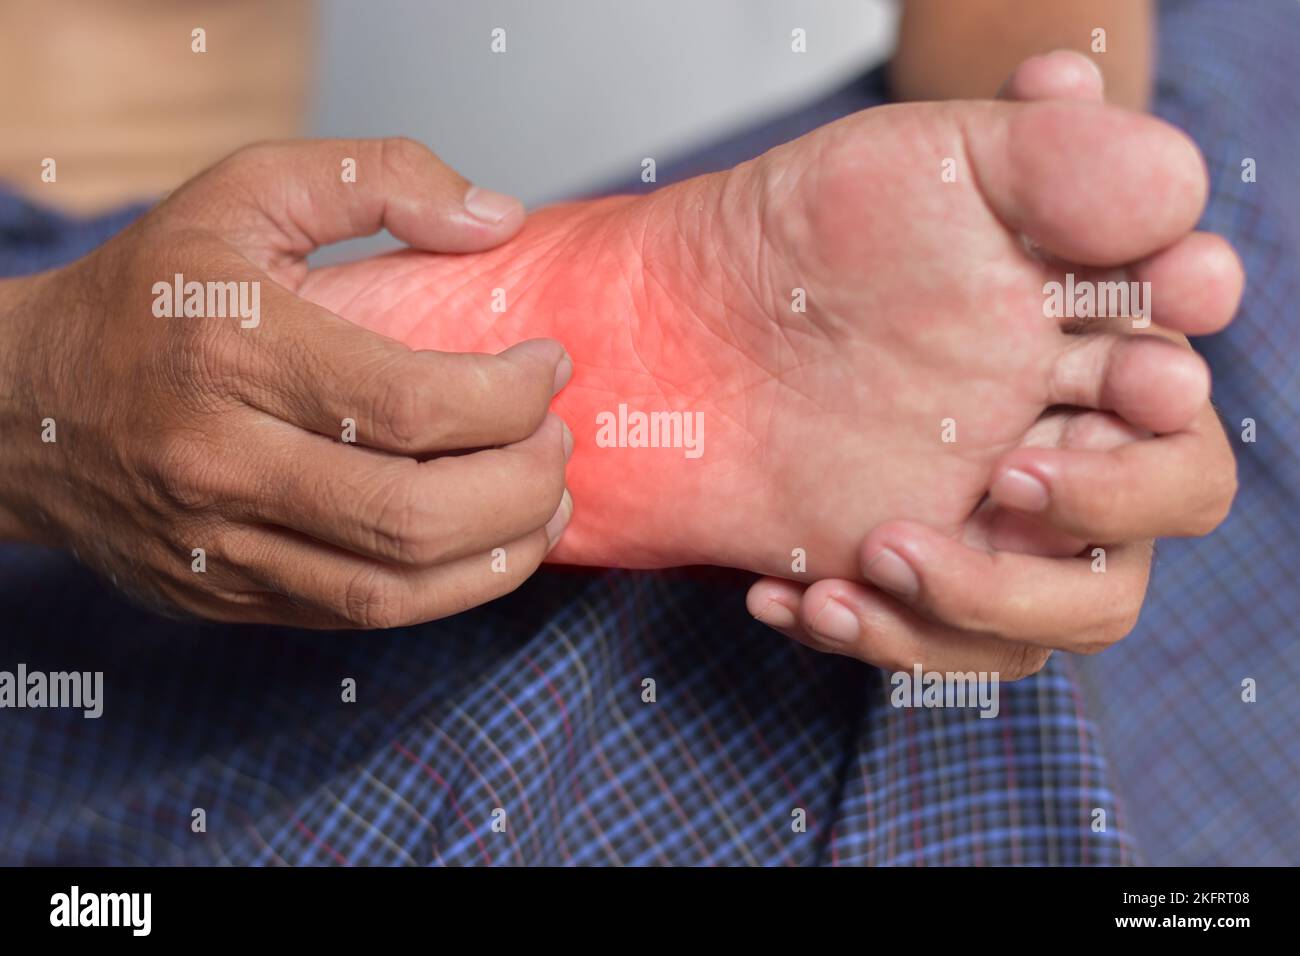 Itchy foot skin of Asian young man. Concept of skin diseases such as scabies, fungal infection, rash, allergy, etc. Stock Photo